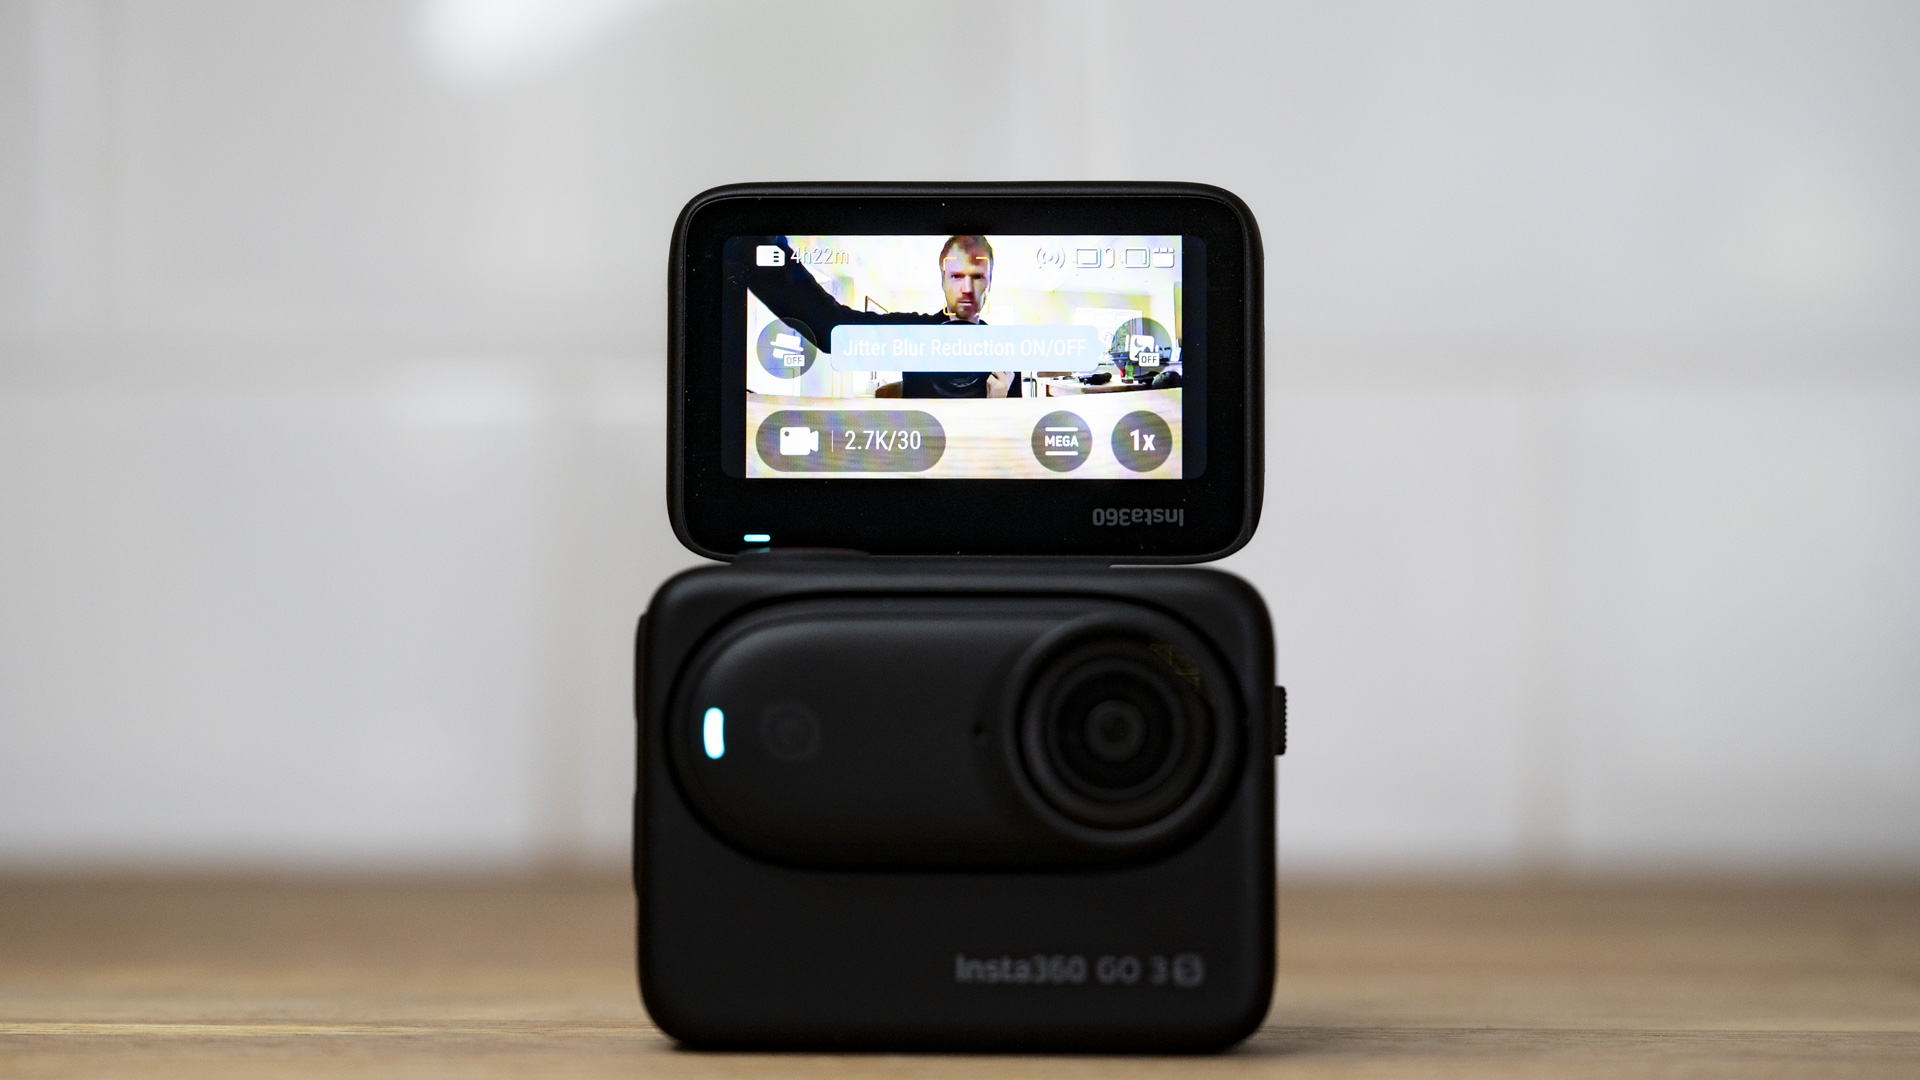 Insta360 Go 3S camera in its housing with rear selfie screen flipped upon a wooden surface